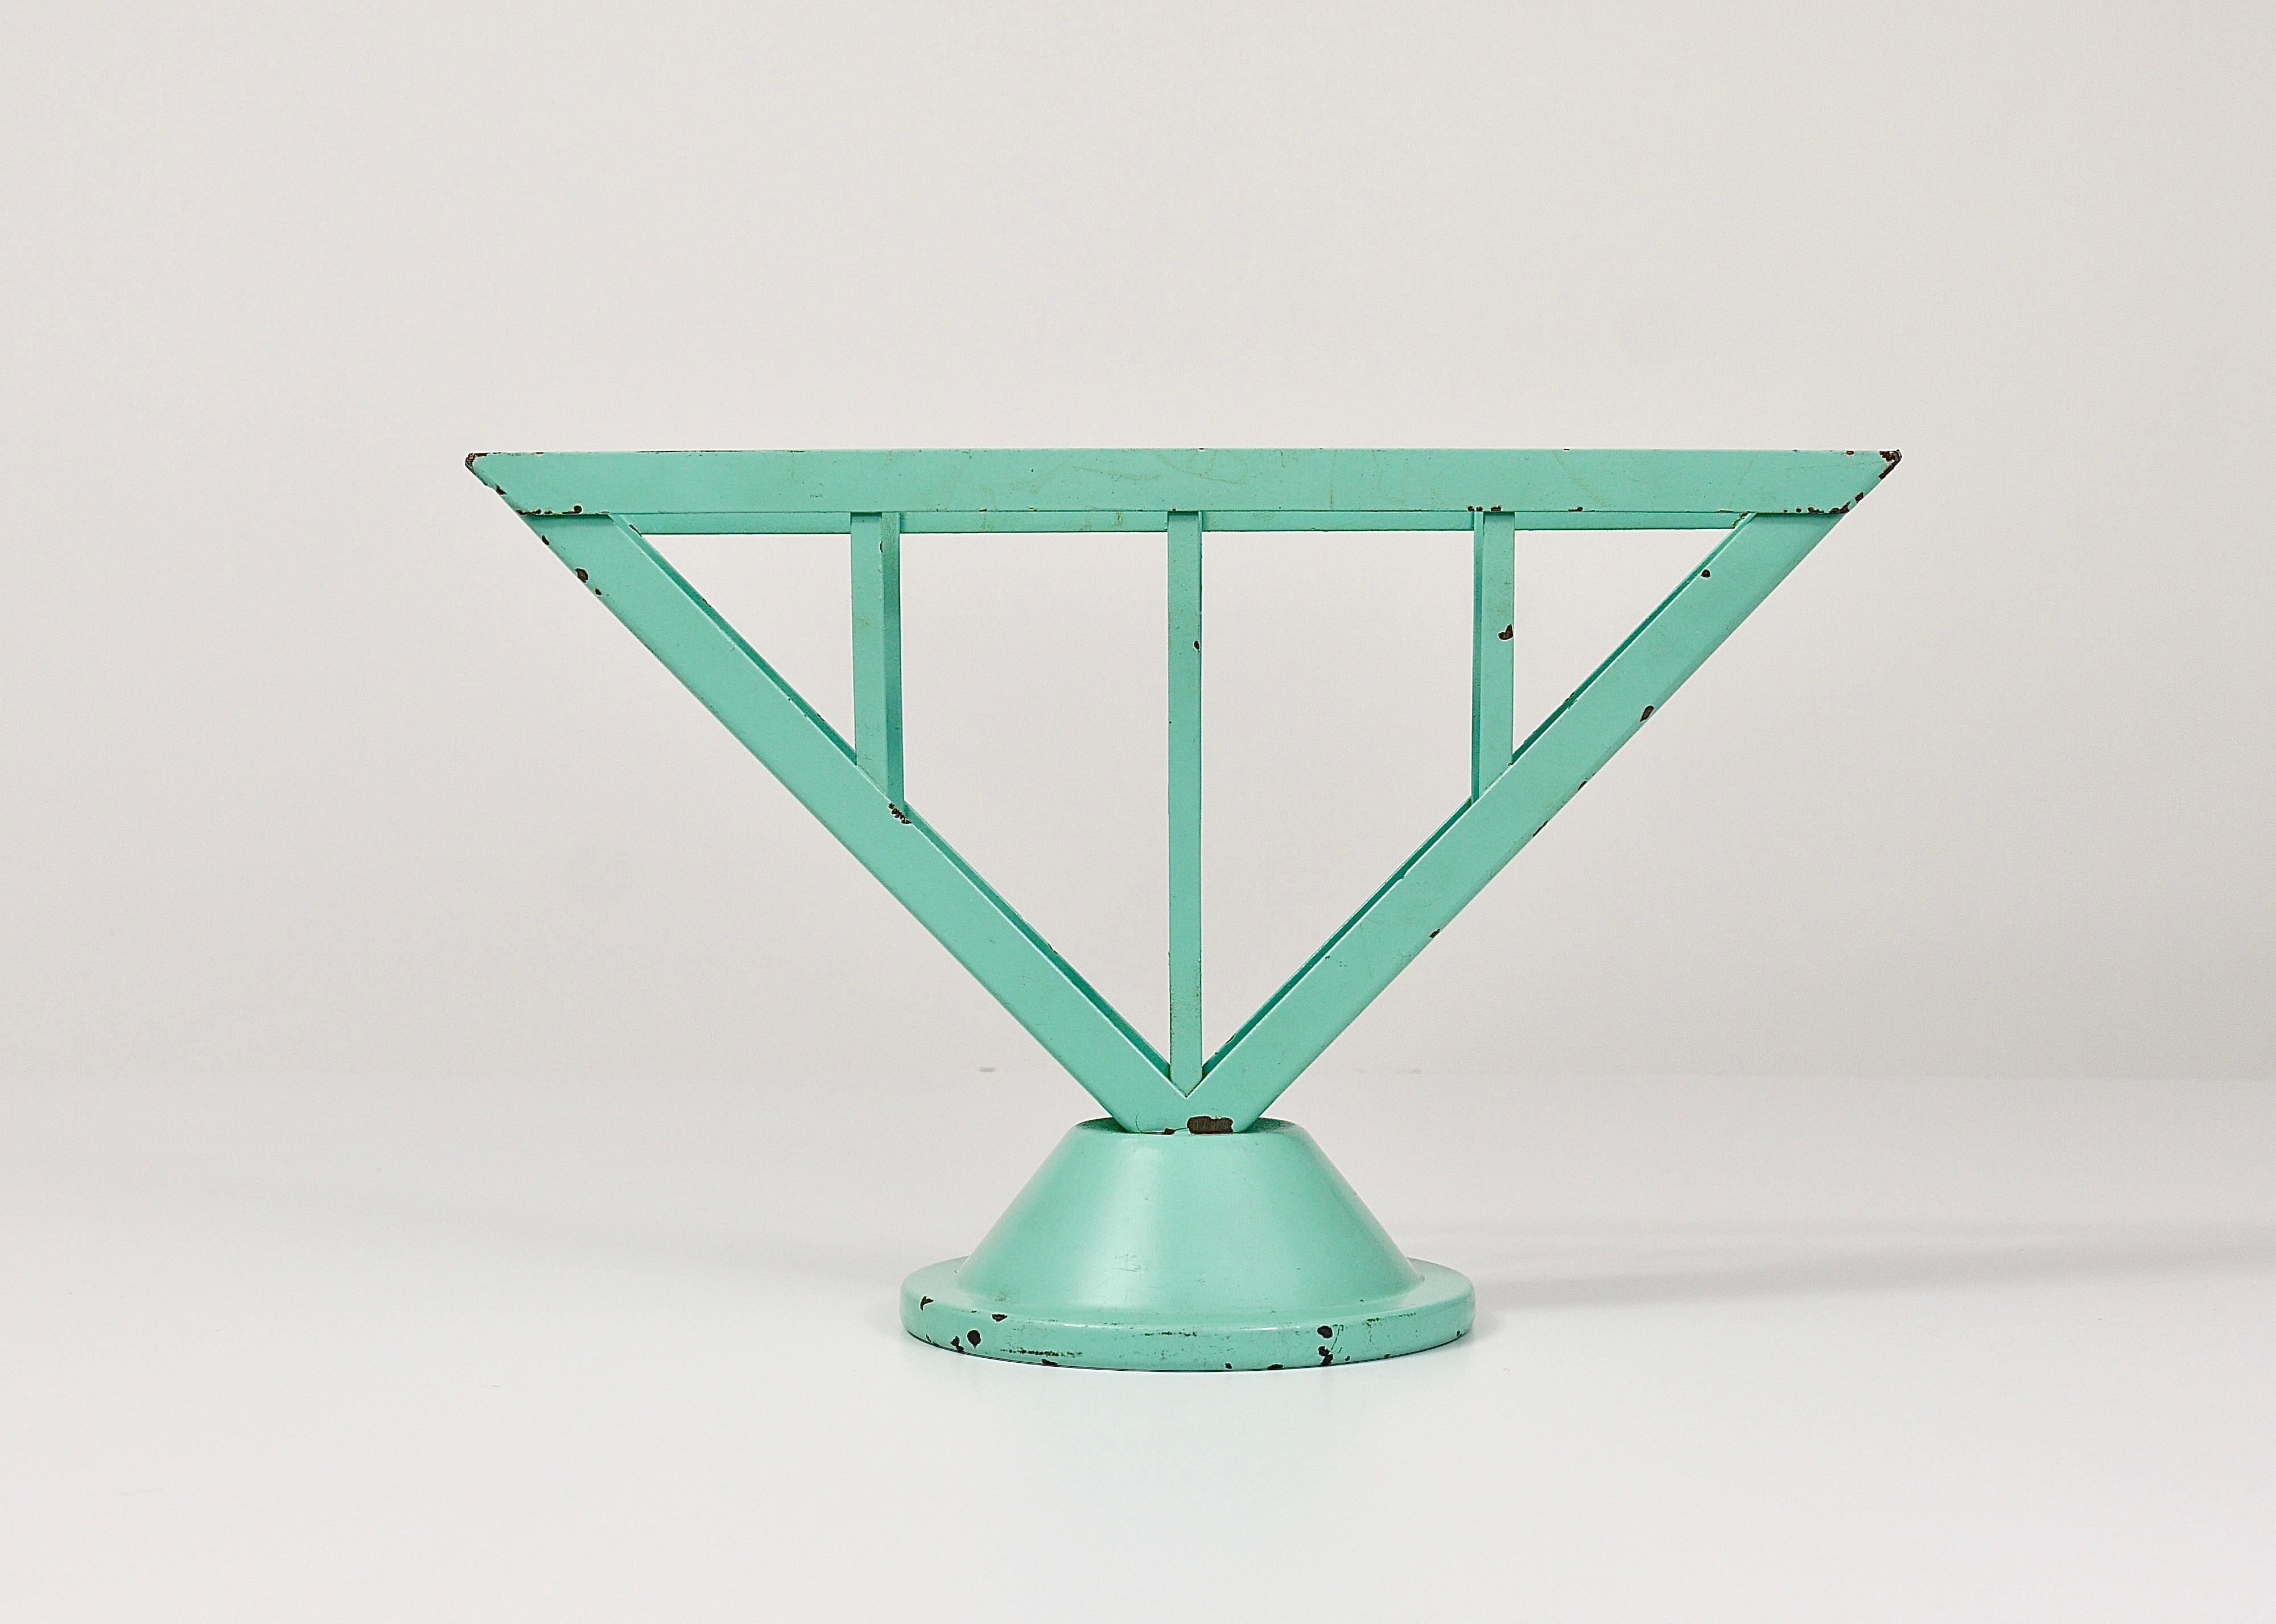 An iconic sheet metal Bauhaus napkin stand 7 holder from the early 1930s in light-green / pastel-green. Designed by Marianne Brandt (1893-1983), manufactured by Ruppel Werke, Ruppelwerke in Gotha, Germany. In very good original condition with